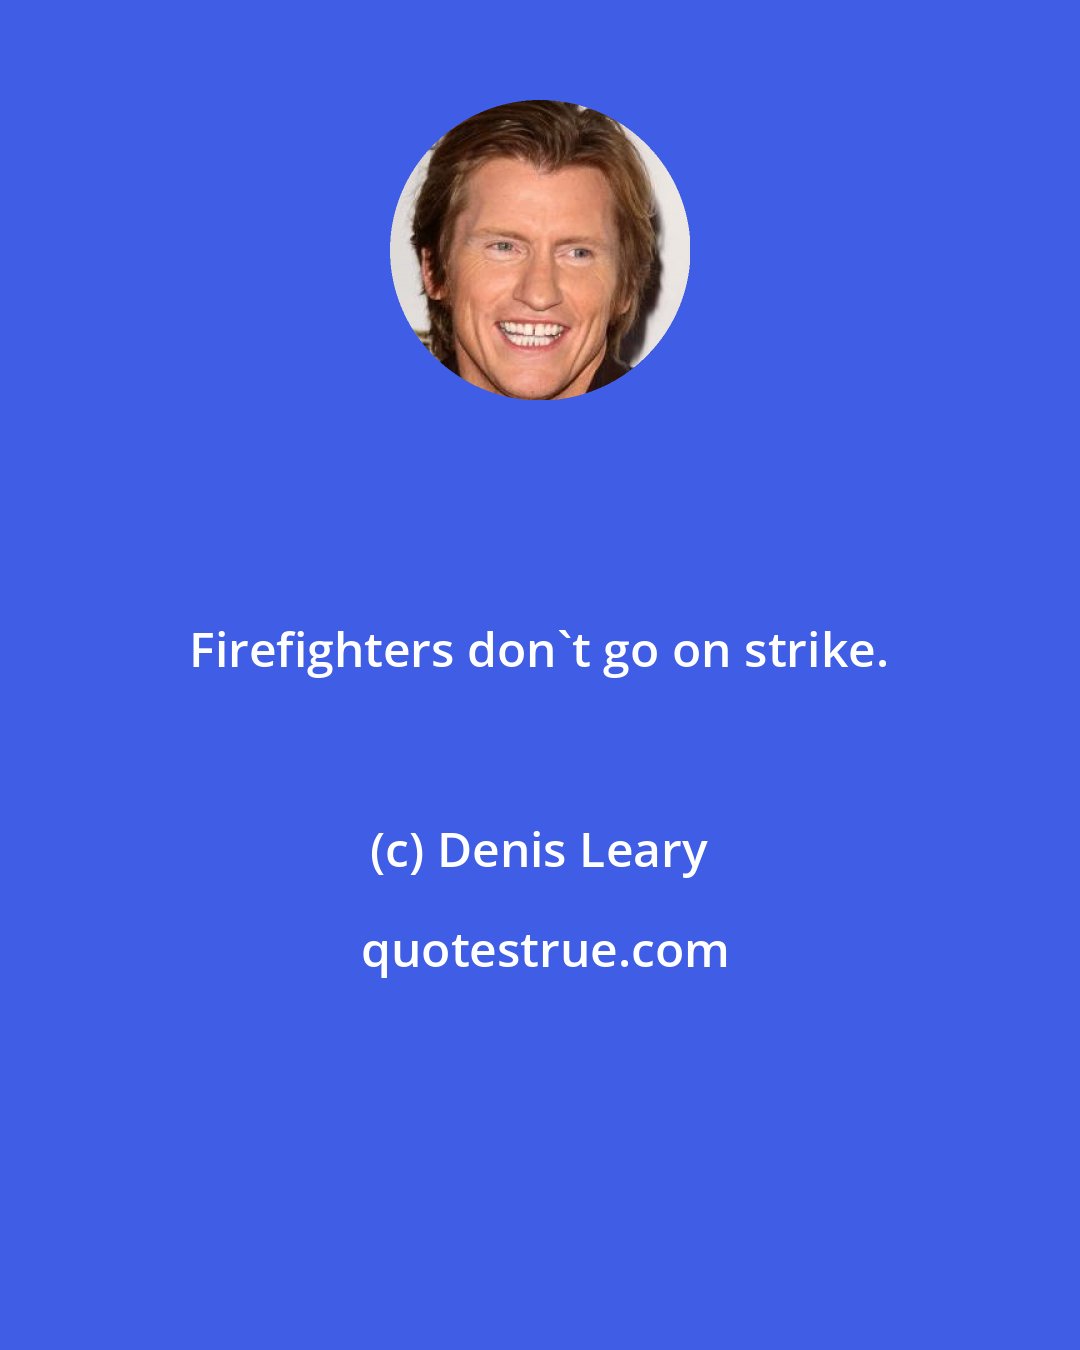 Denis Leary: Firefighters don't go on strike.